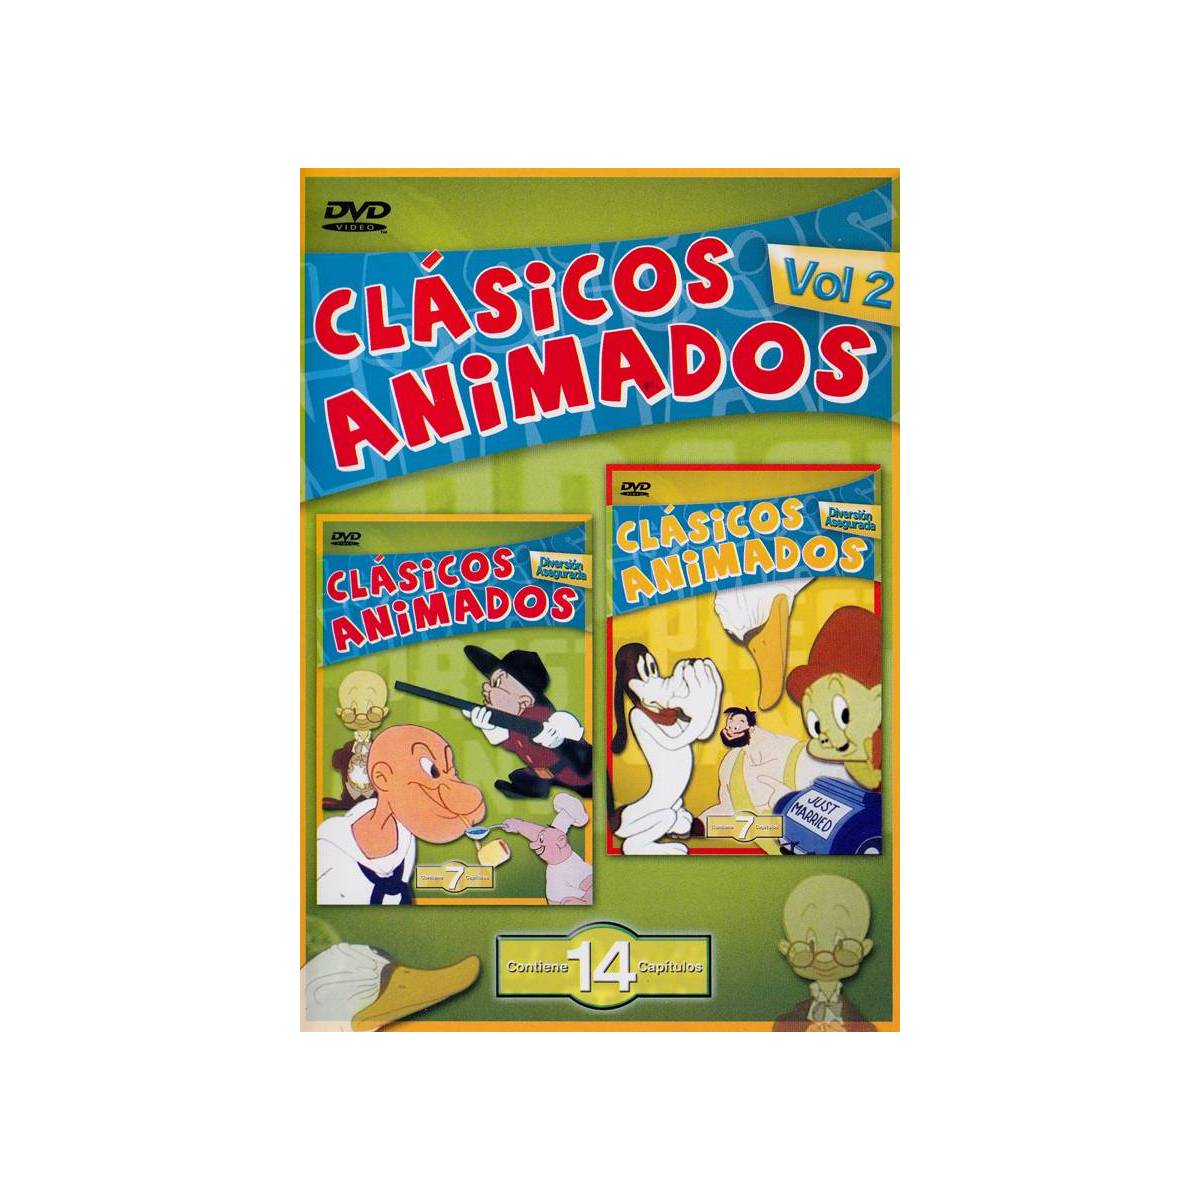 Los Mejores Clásicos Animados (The Best of Animated Classics) Spanish Audio  DVD